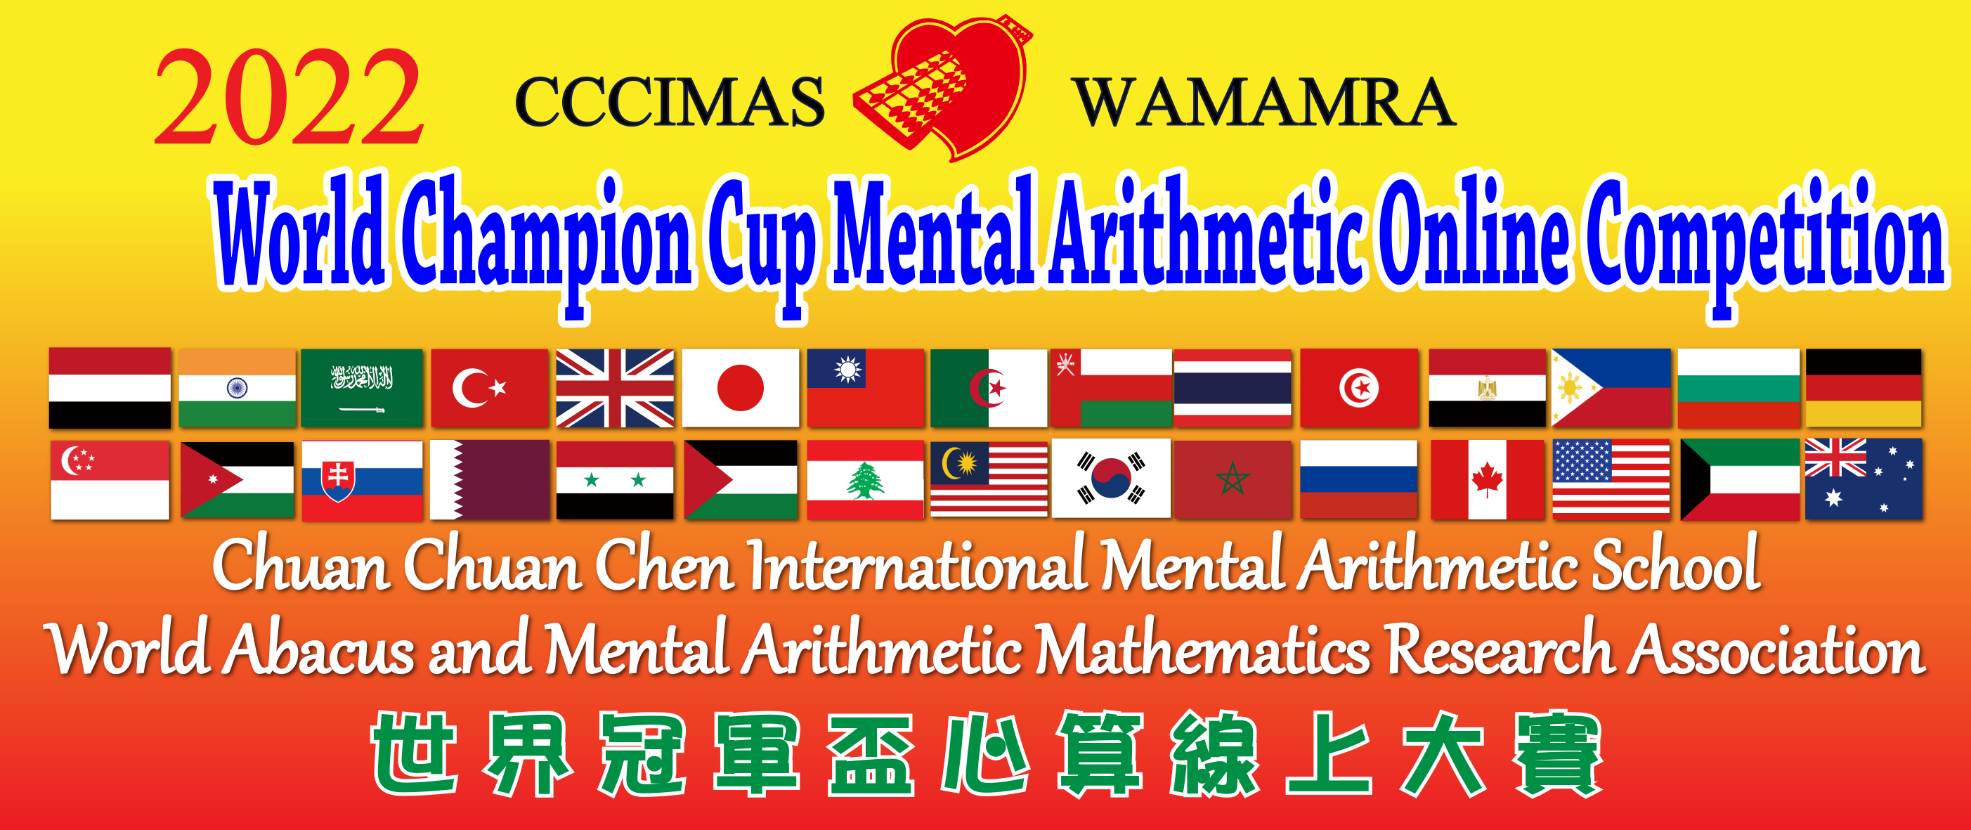 2022 World Champion Cup Mental Arithmetic Online Competition 